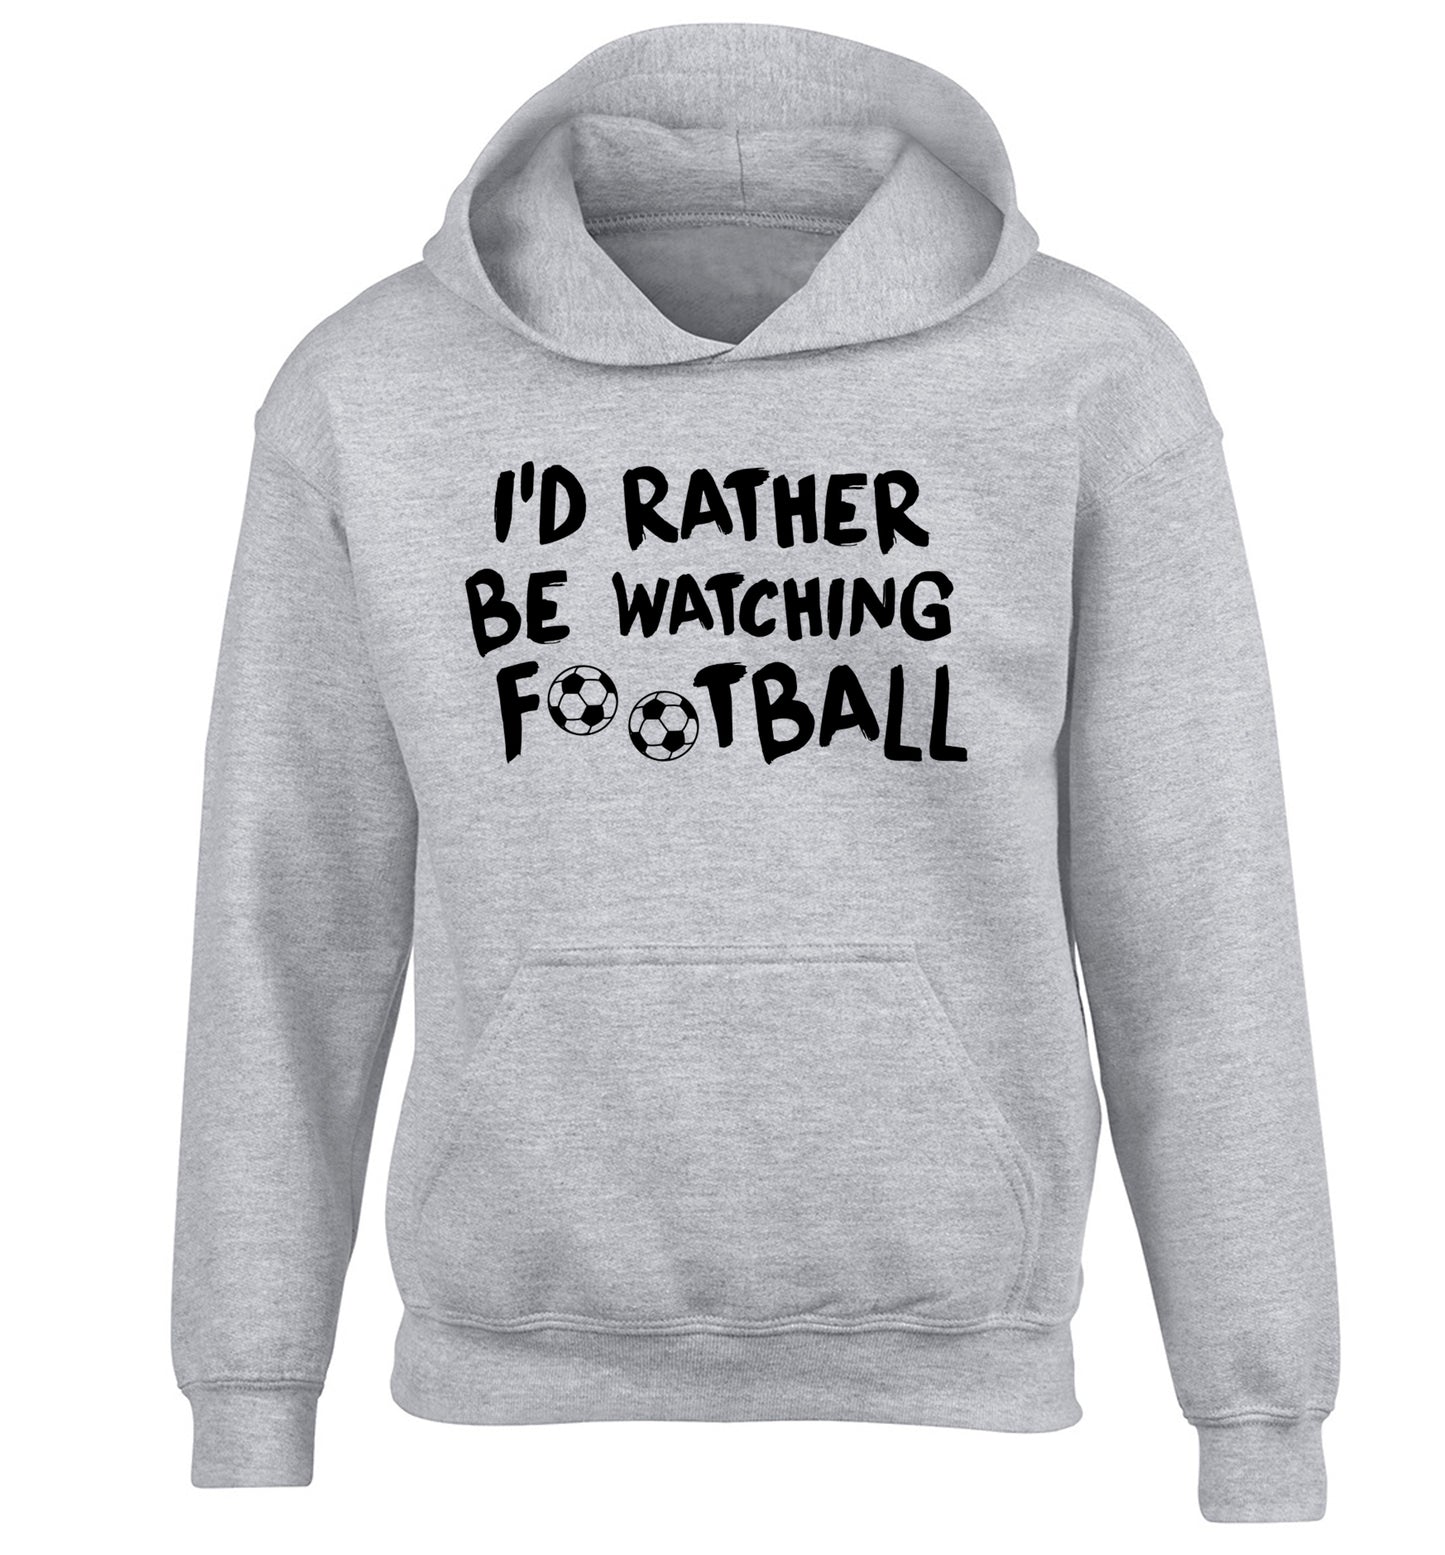 I'd rather be watching football children's grey hoodie 12-14 Years